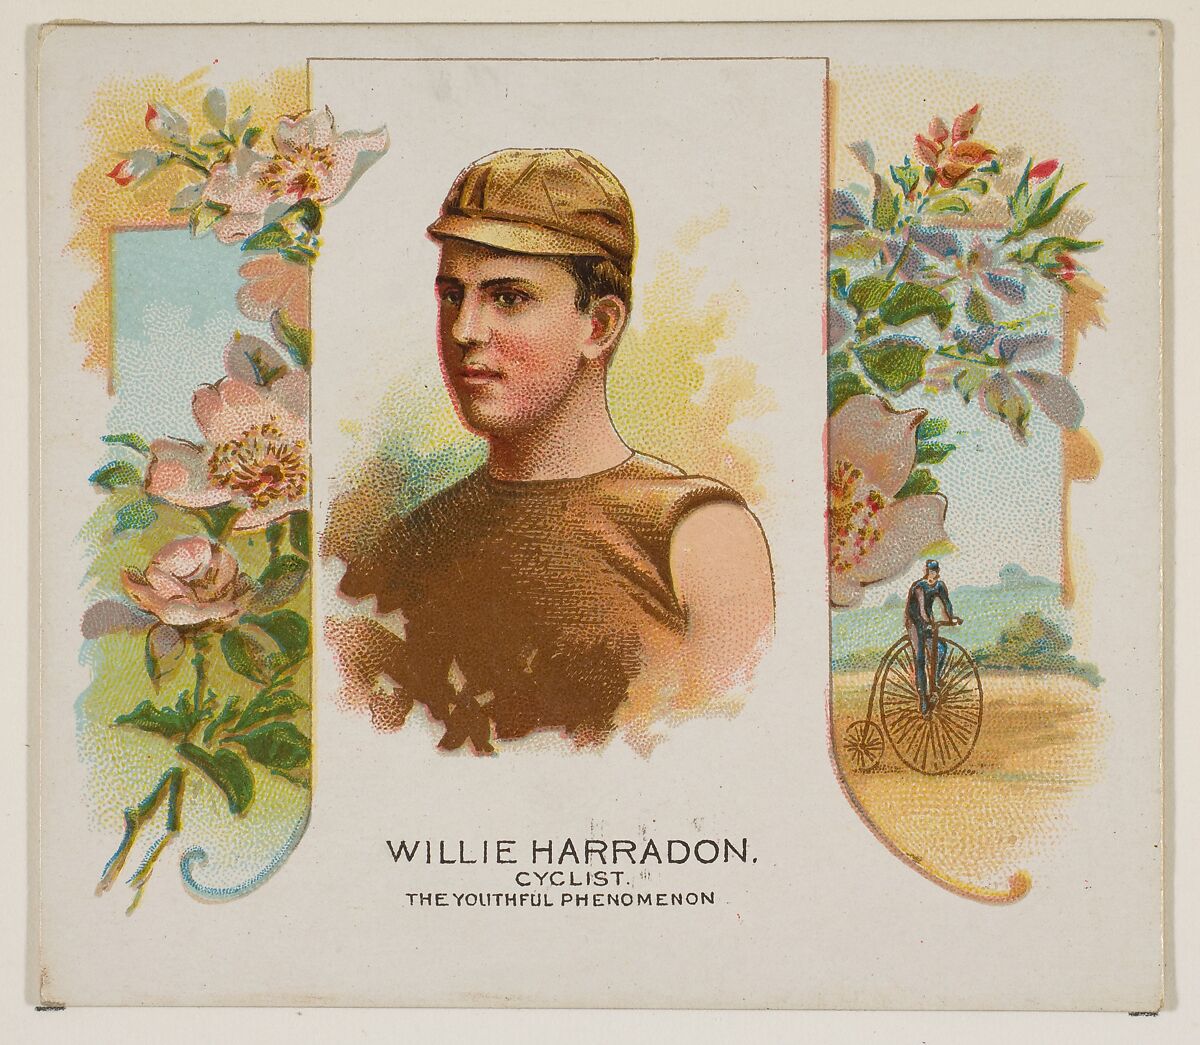 Willie Harradon, Cyclist, The Youthful Phenomenon, from World's Champions, Second Series (N43) for Allen & Ginter Cigarettes, Allen &amp; Ginter (American, Richmond, Virginia), Commercial lithograph 